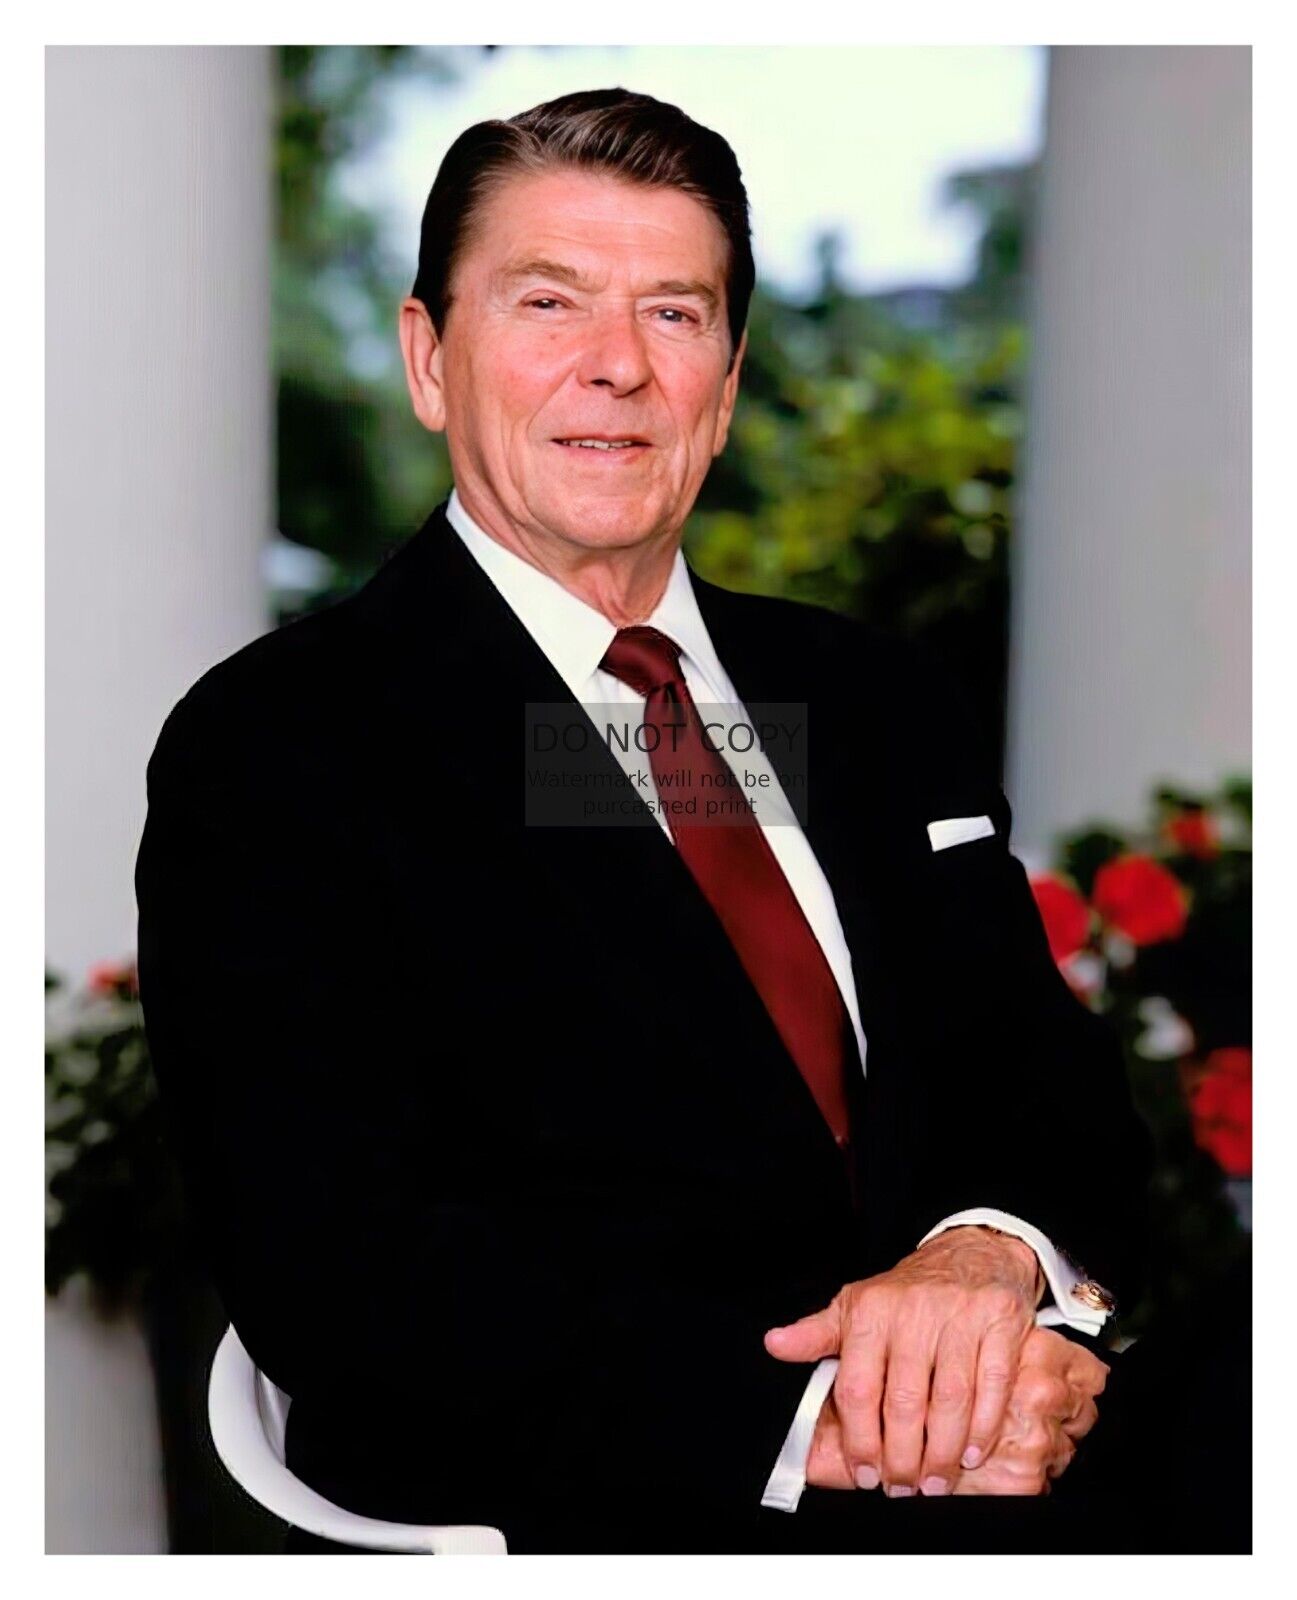 PRESIDENT RONALD REAGAN OF THE UNITED STATES OF AMERICA PORTRAIT 8X10 PHOTOGRAPH